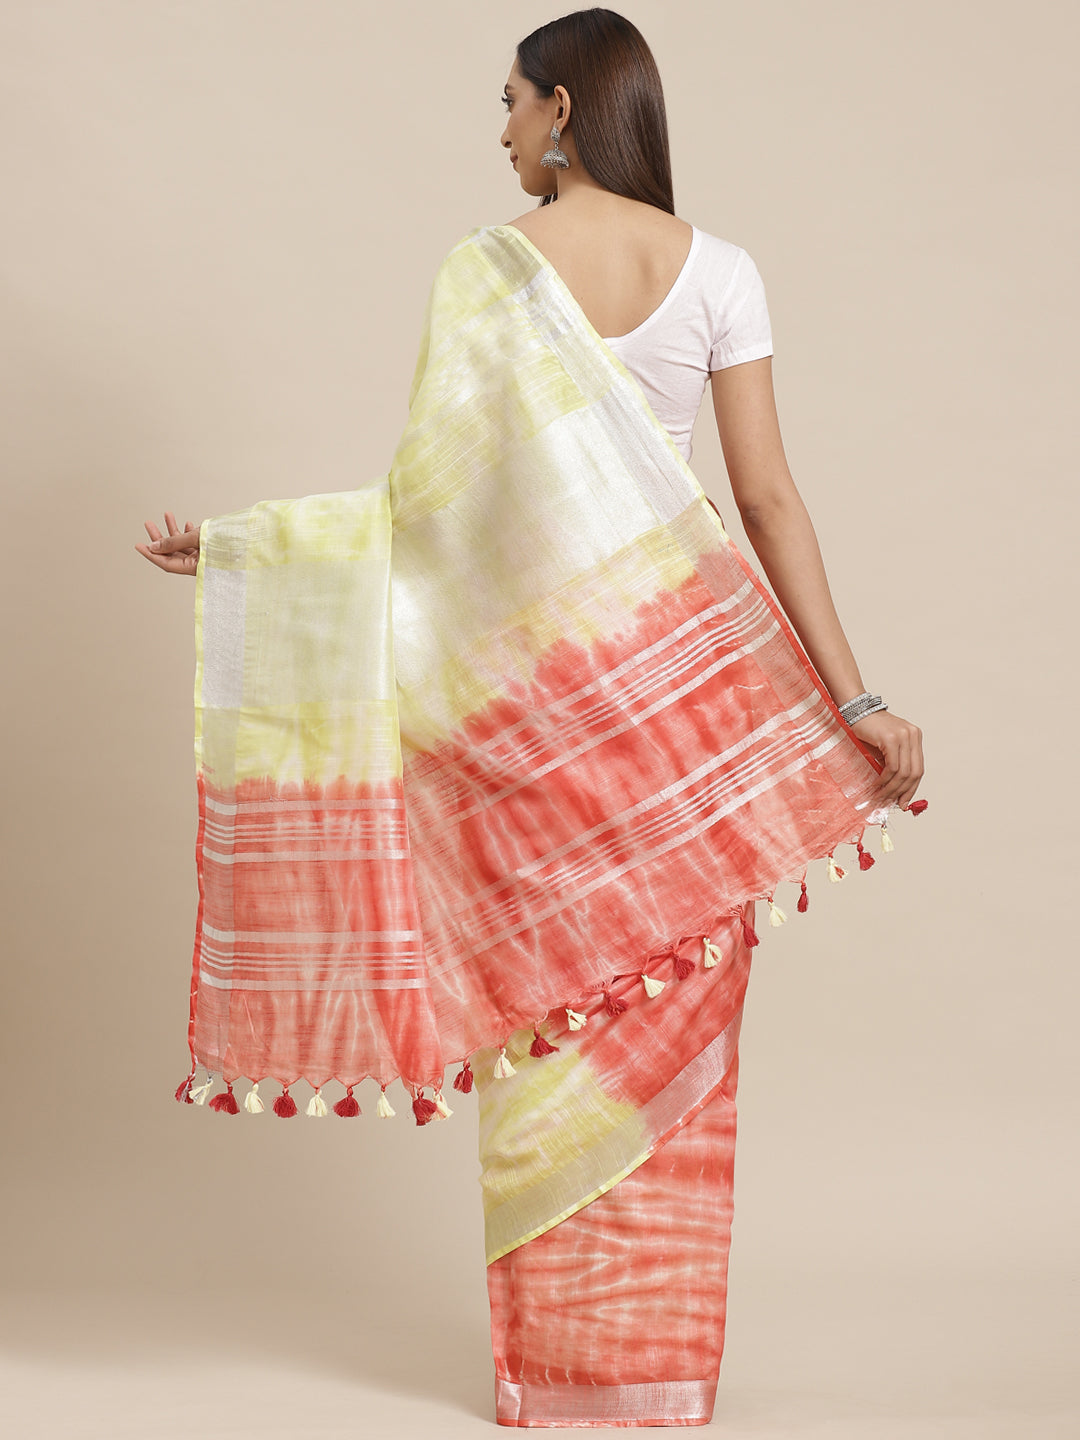 Yellow and Red, Kalakari India Linen Shibori Woven Saree and Blouse ALBGSA0074-Saree-Kalakari India-ALBGSA0074-Cotton, Geographical Indication, Hand Crafted, Heritage Prints, Linen, Natural Dyes, Red, Sarees, Shibori, Sustainable Fabrics, Woven, Yellow-[Linen,Ethnic,wear,Fashionista,Handloom,Handicraft,Indigo,blockprint,block,print,Cotton,Chanderi,Blue, latest,classy,party,bollywood,trendy,summer,style,traditional,formal,elegant,unique,style,hand,block,print, dabu,booti,gift,present,glamorous,af